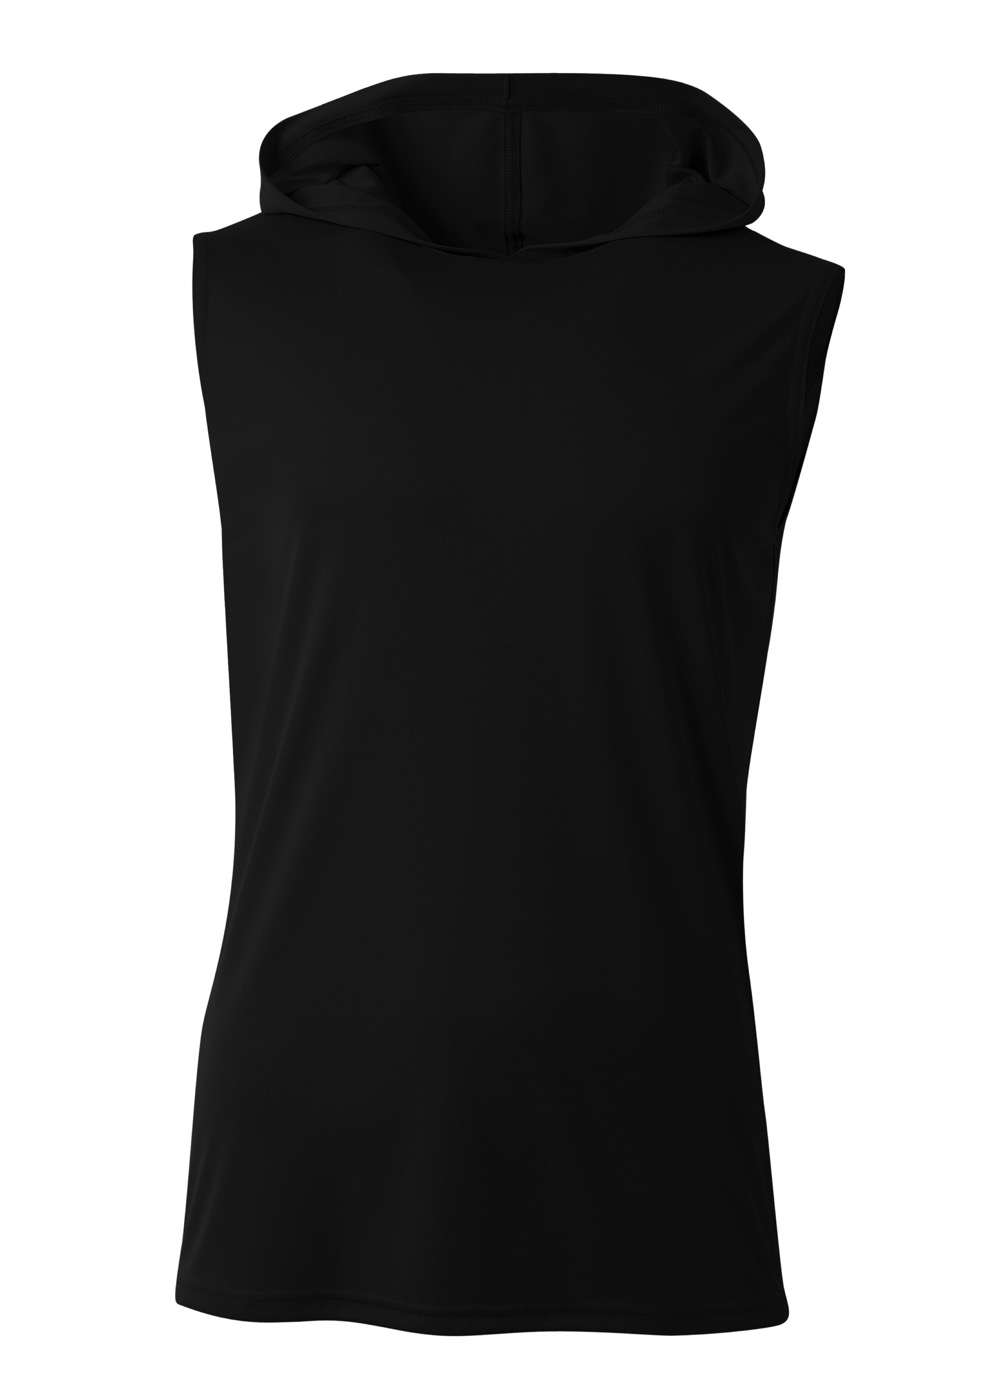 A4 NB3410 Sleeveless Hooded Tee in Best Price